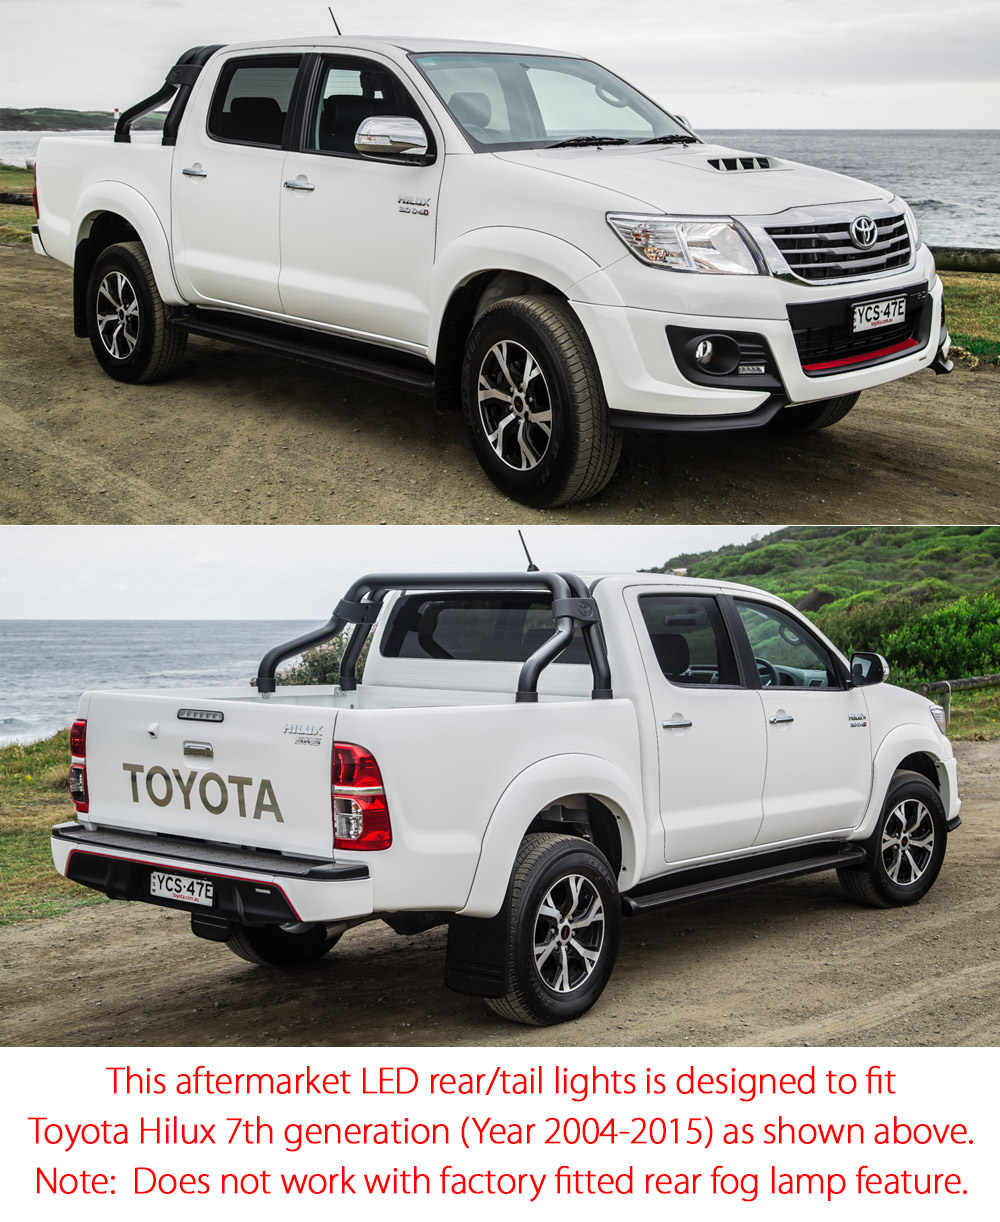 RLTH01 Toyota Hilux 7th Generation Gen 2004 2005 2006 2007 2008 2009 2010 2011 2012 2013 2014 2015 SR SR5 Workmate Invincible Icon Active SR SR5 Workmate Smoked Transparent LED Smoked LED COB Tail Rear Lamp Lights For Car Smoke AT Taillights Rear Lamp Light Aftermarket Pair